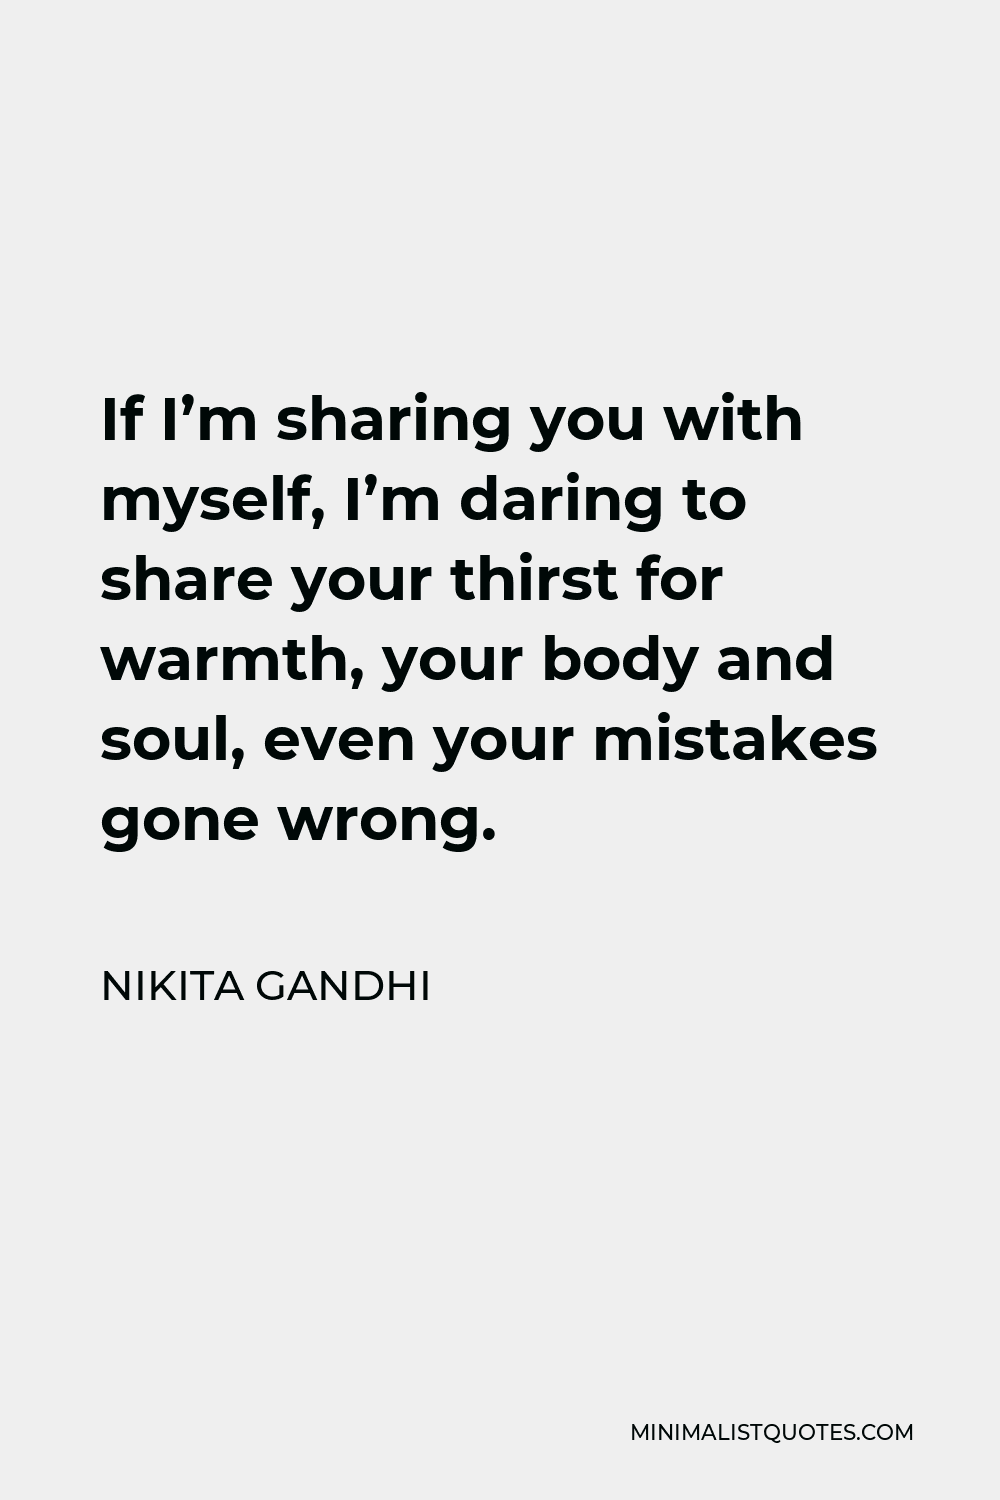 Nikita Gandhi Quote - If I’m sharing you with myself, I’m daring to share your thirst for warmth, your body and soul, even your mistakes gone wrong.